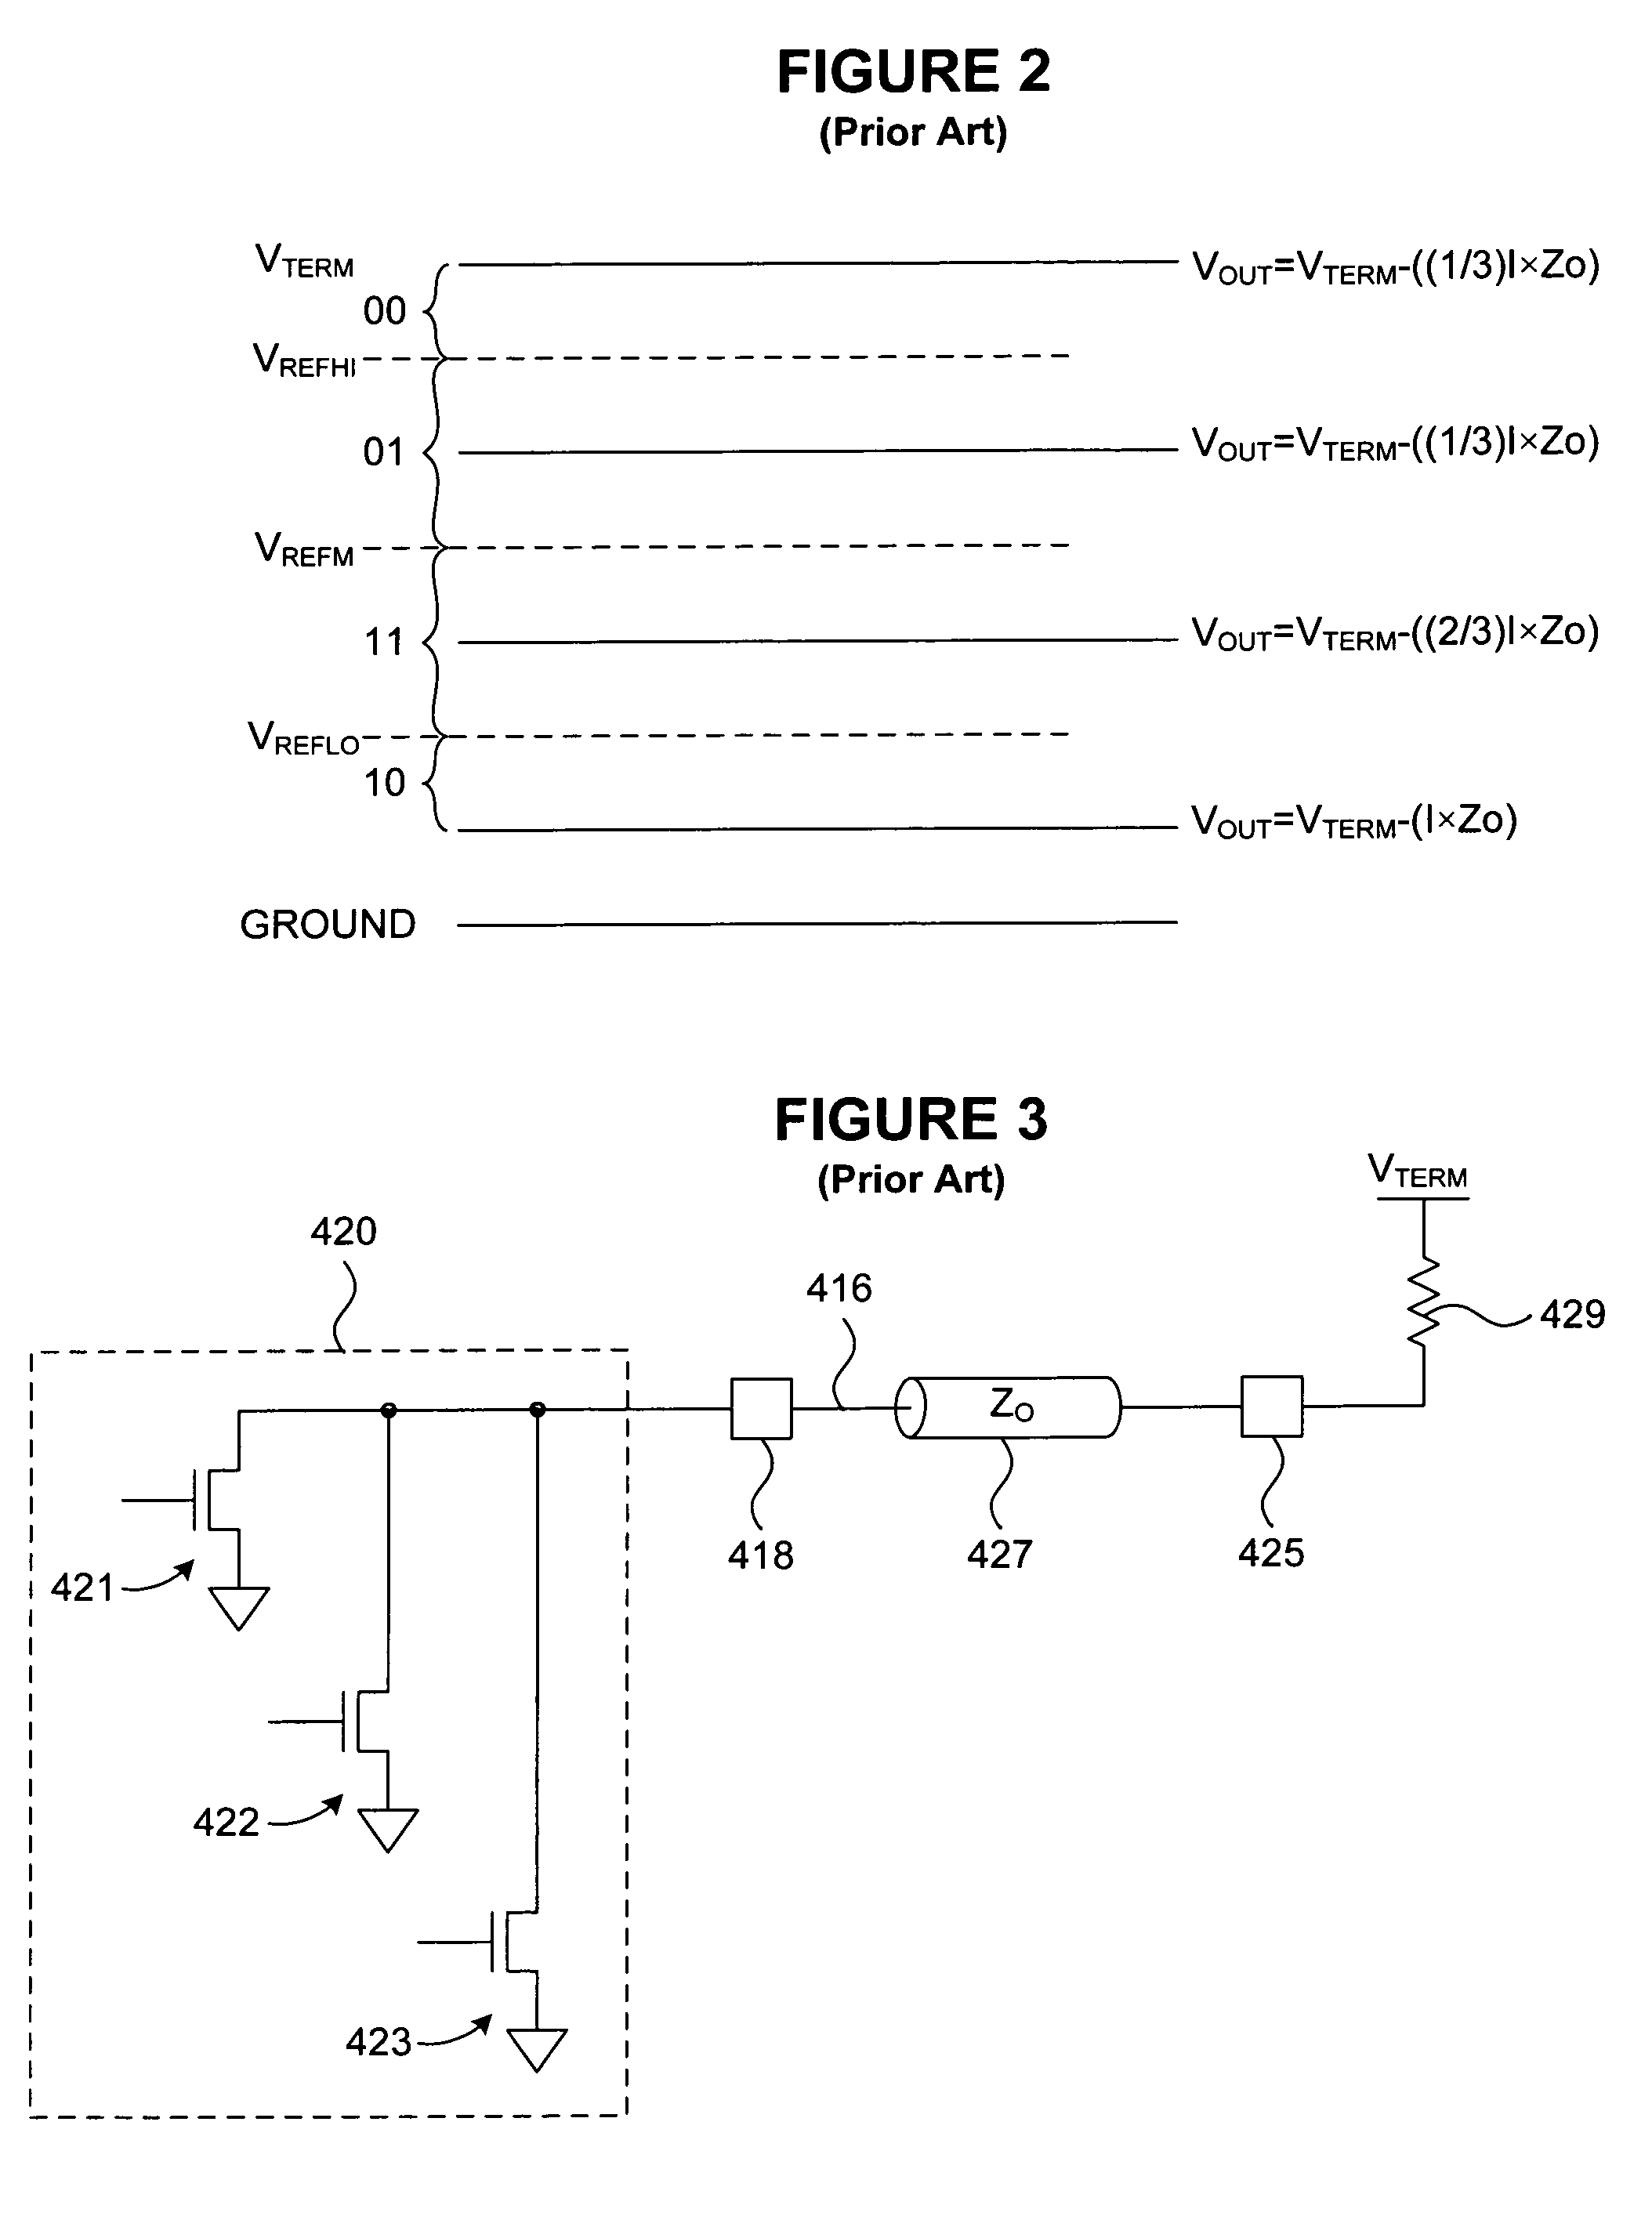 Method and apparatus for generating multi-level reference voltage in systems using equalization or crosstalk cancellation